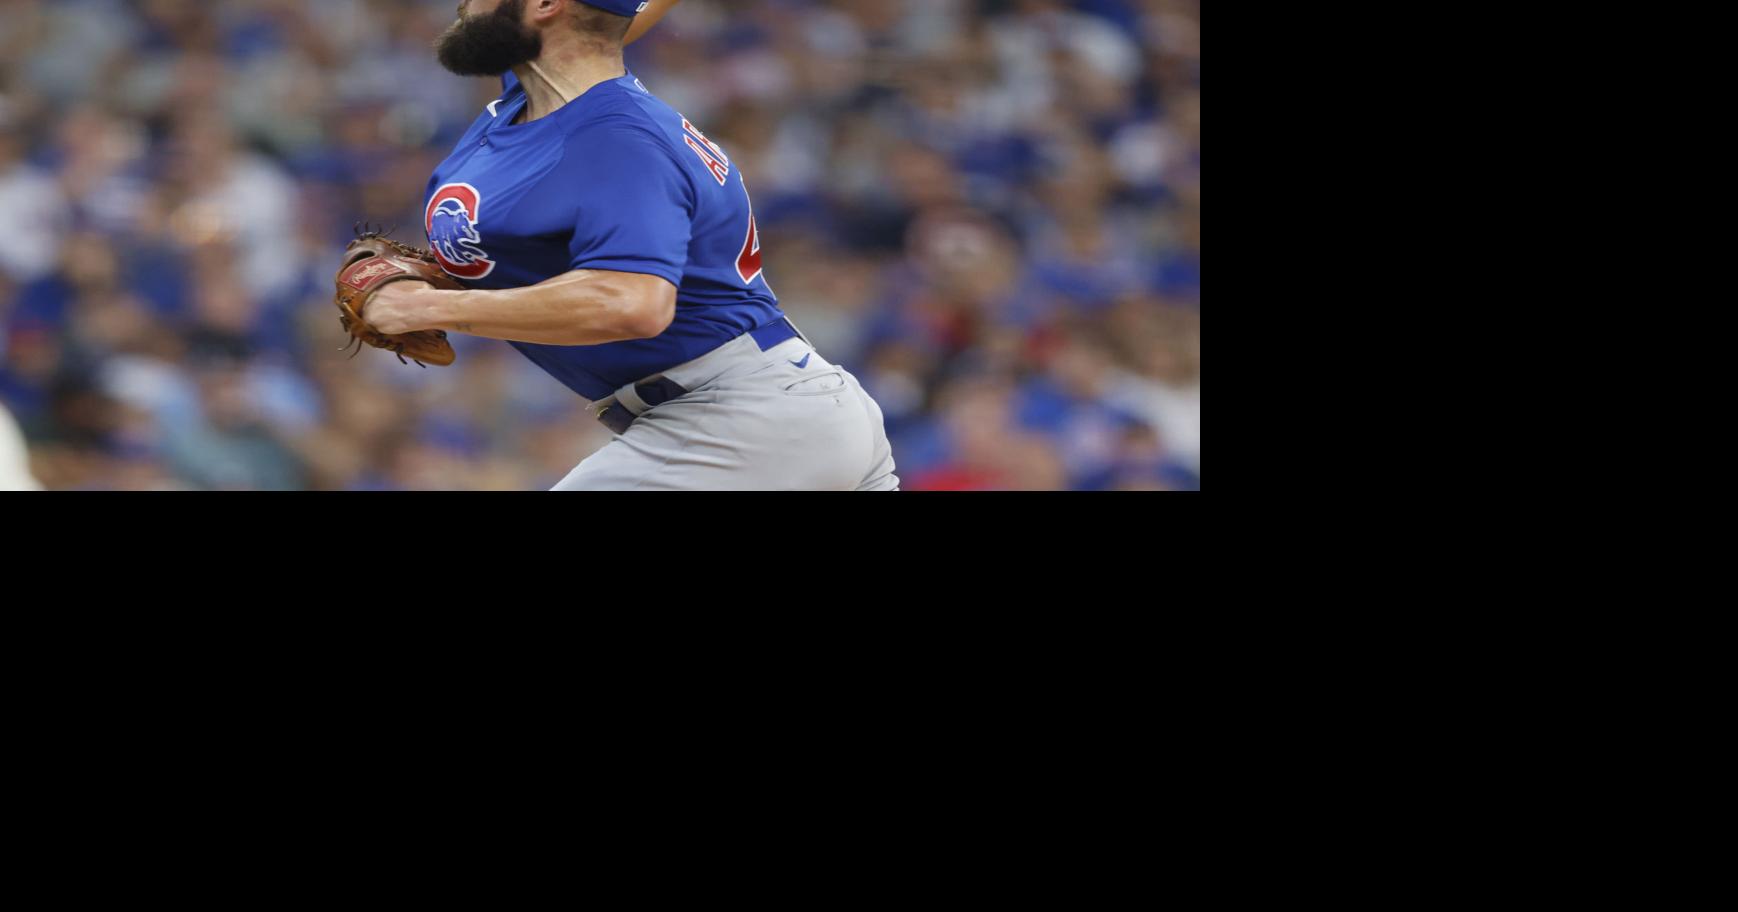 Chicago Fire': Chicago Cubs' Kris Bryant and Jake Arrieta to Guest